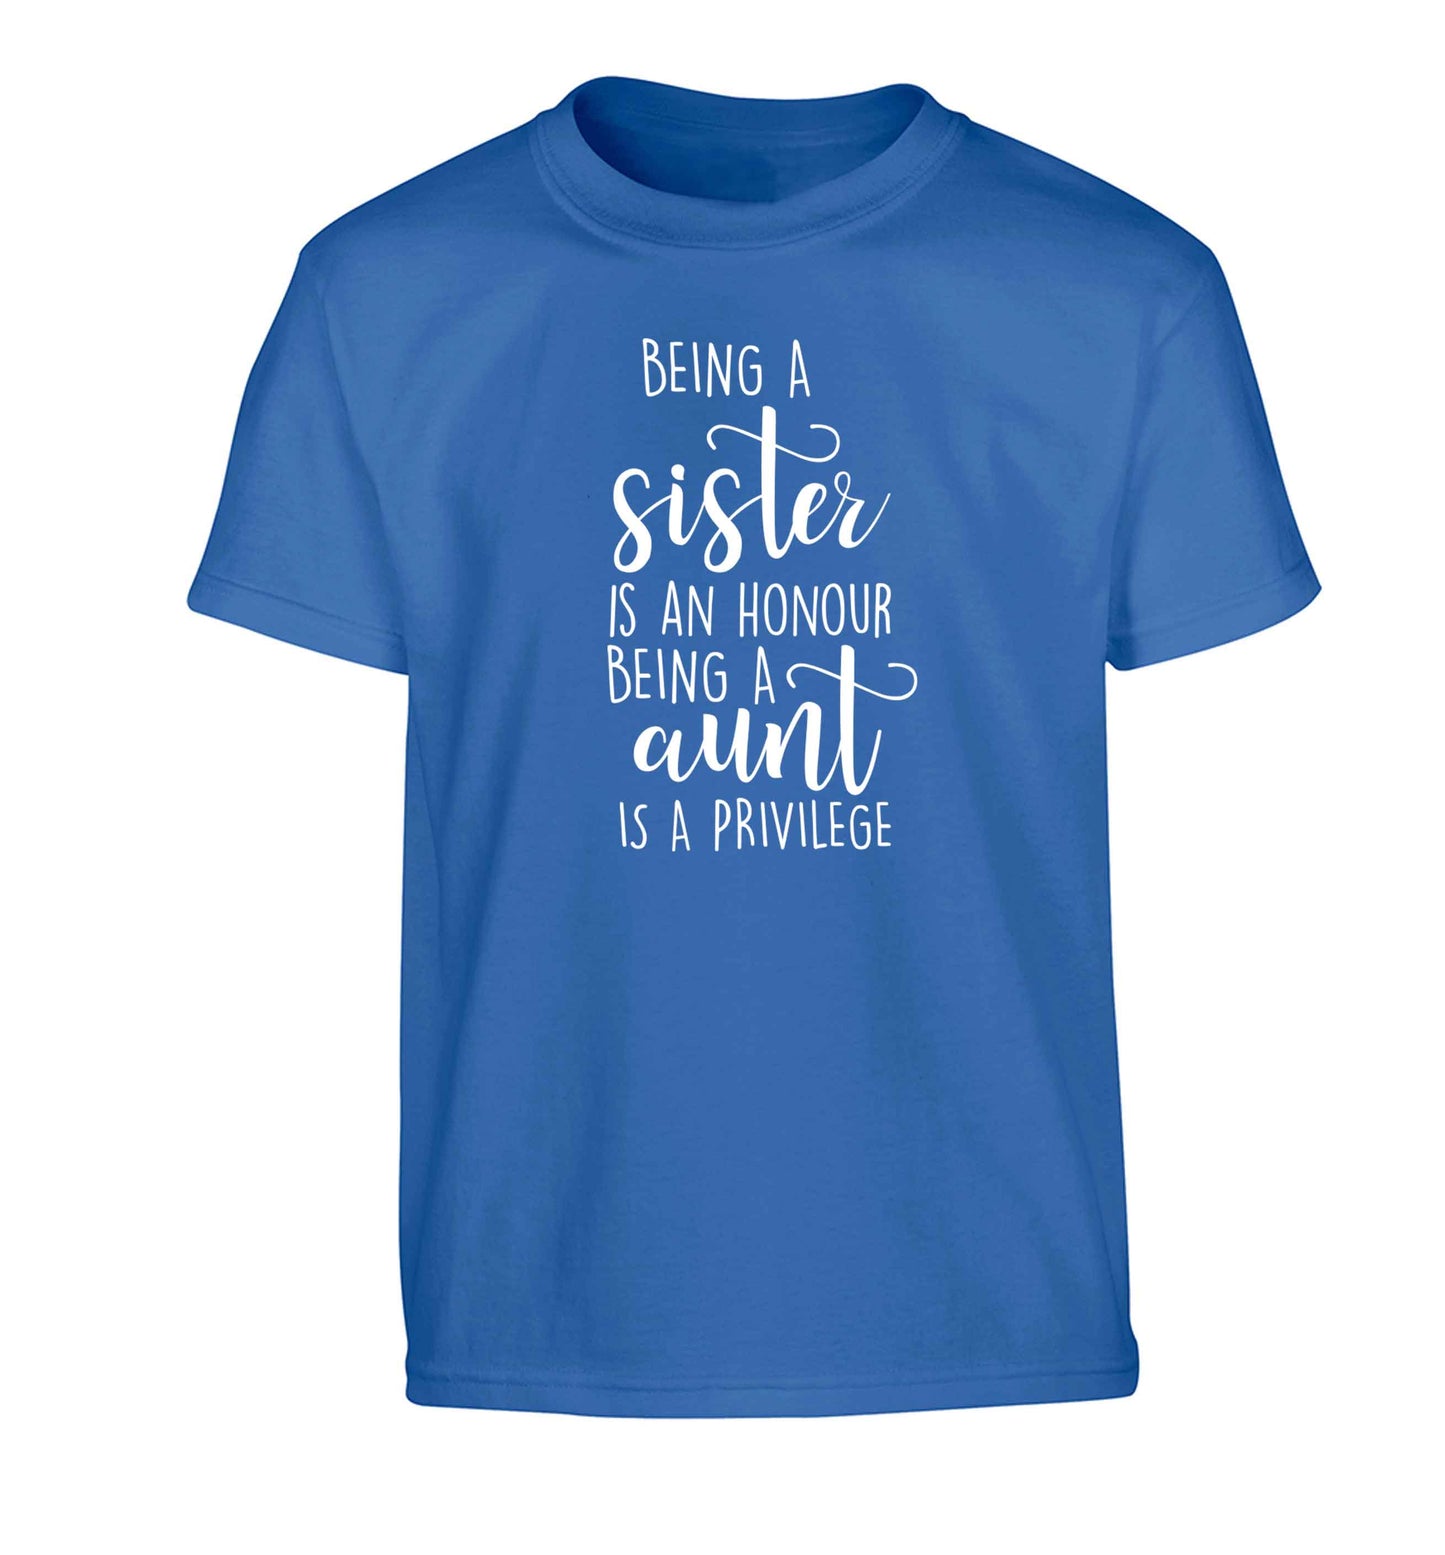 Being a sister is an honour being an auntie is a privilege Children's blue Tshirt 12-13 Years